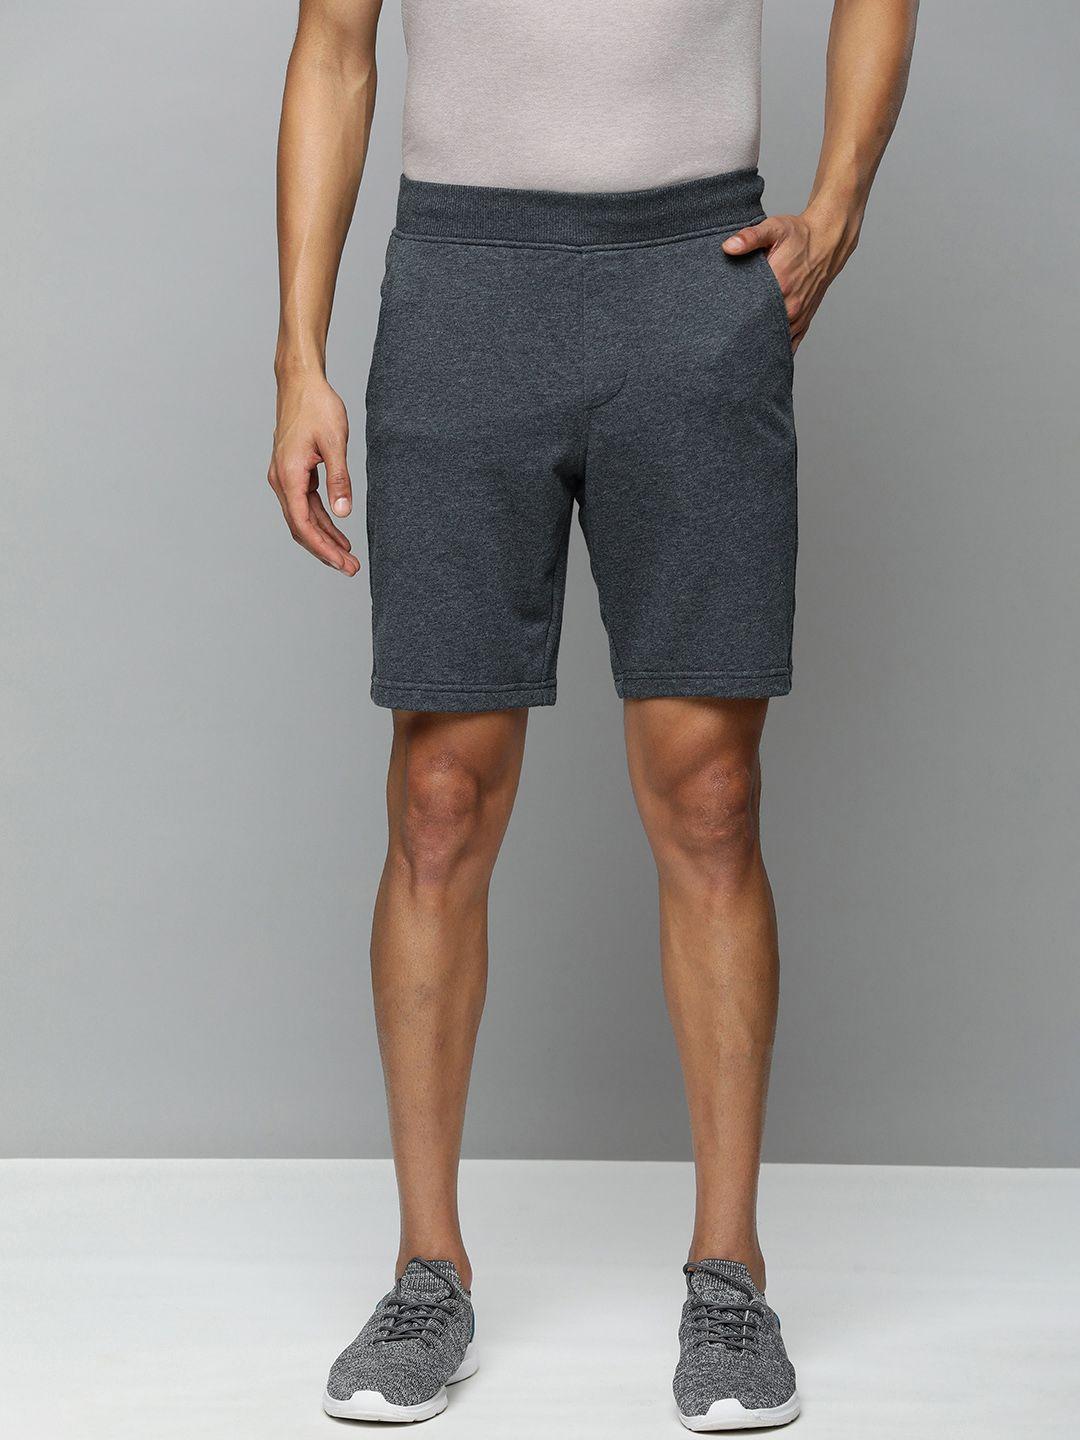 skechers men charcoal sports shorts with e-dry technology technology